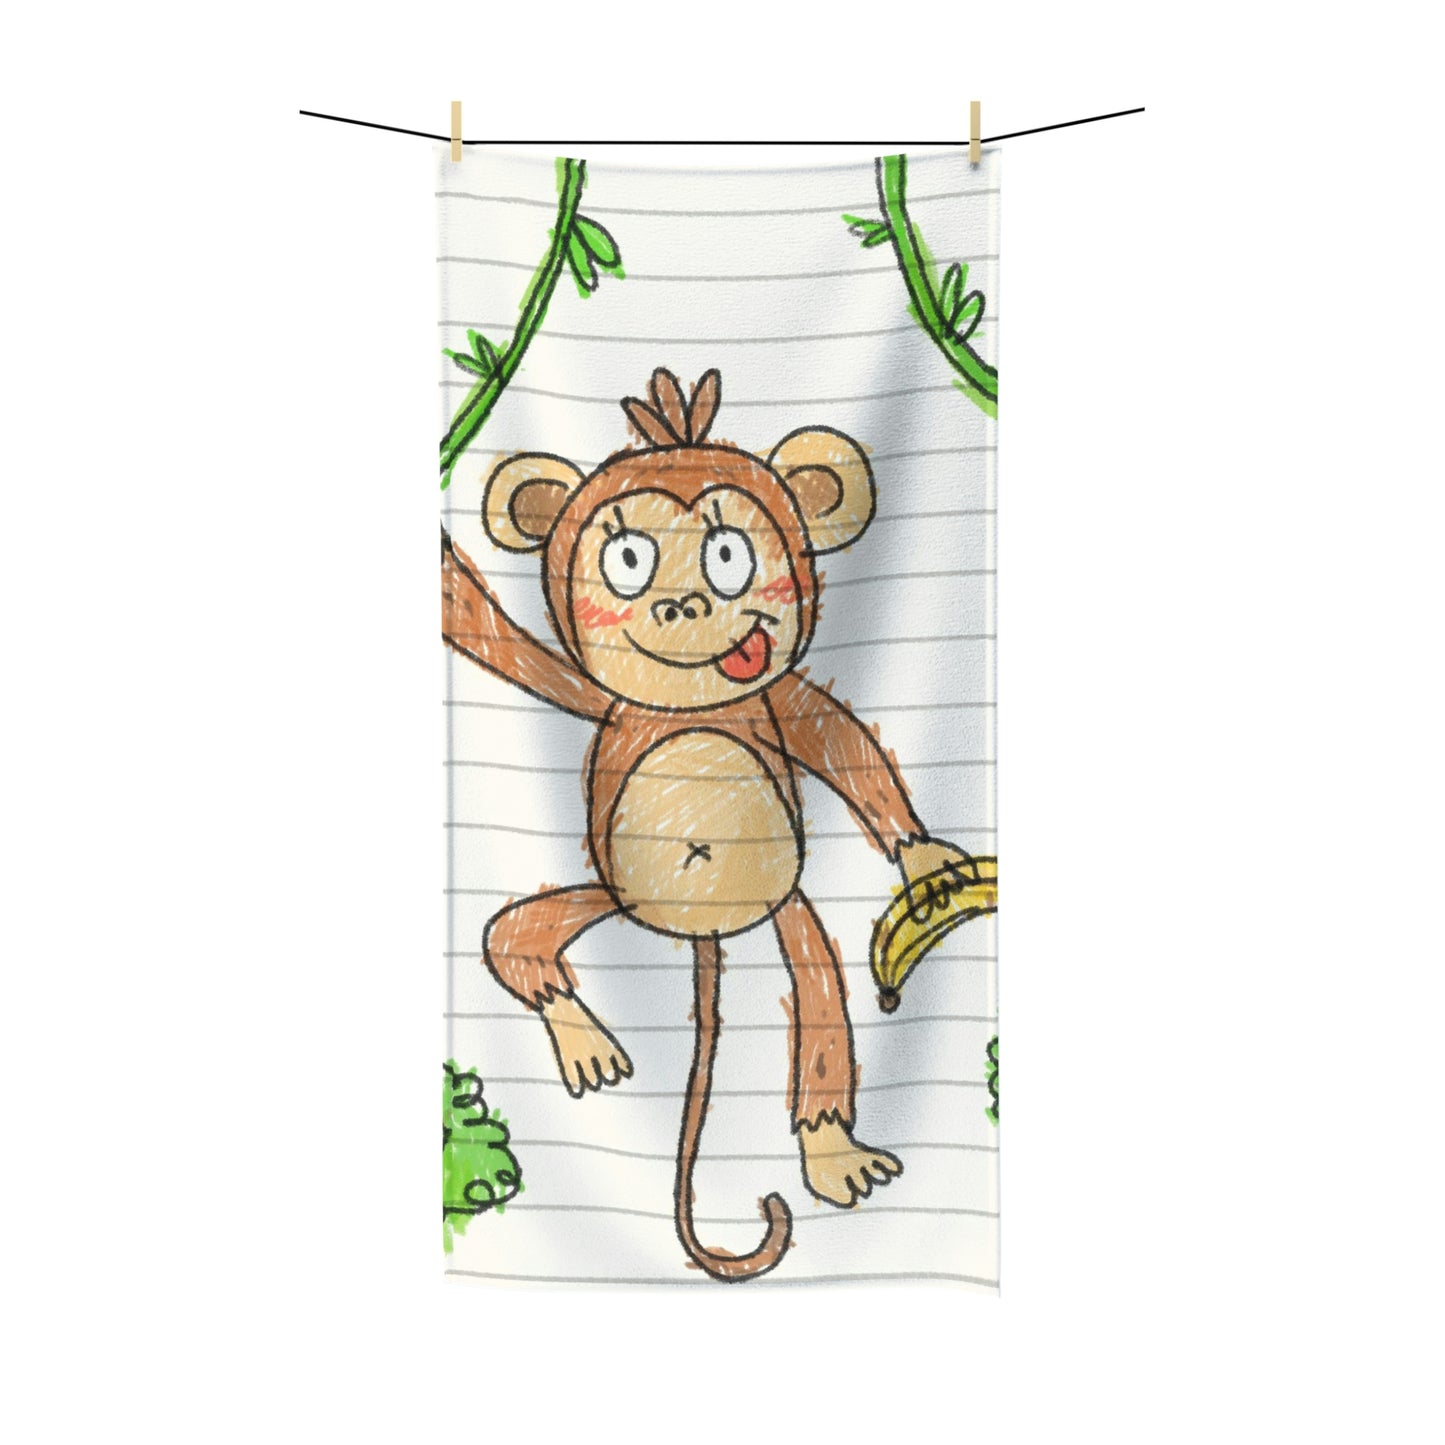 Graphic Monkey - Fun Zoo Clothing for Ape Lovers Polycotton Towel